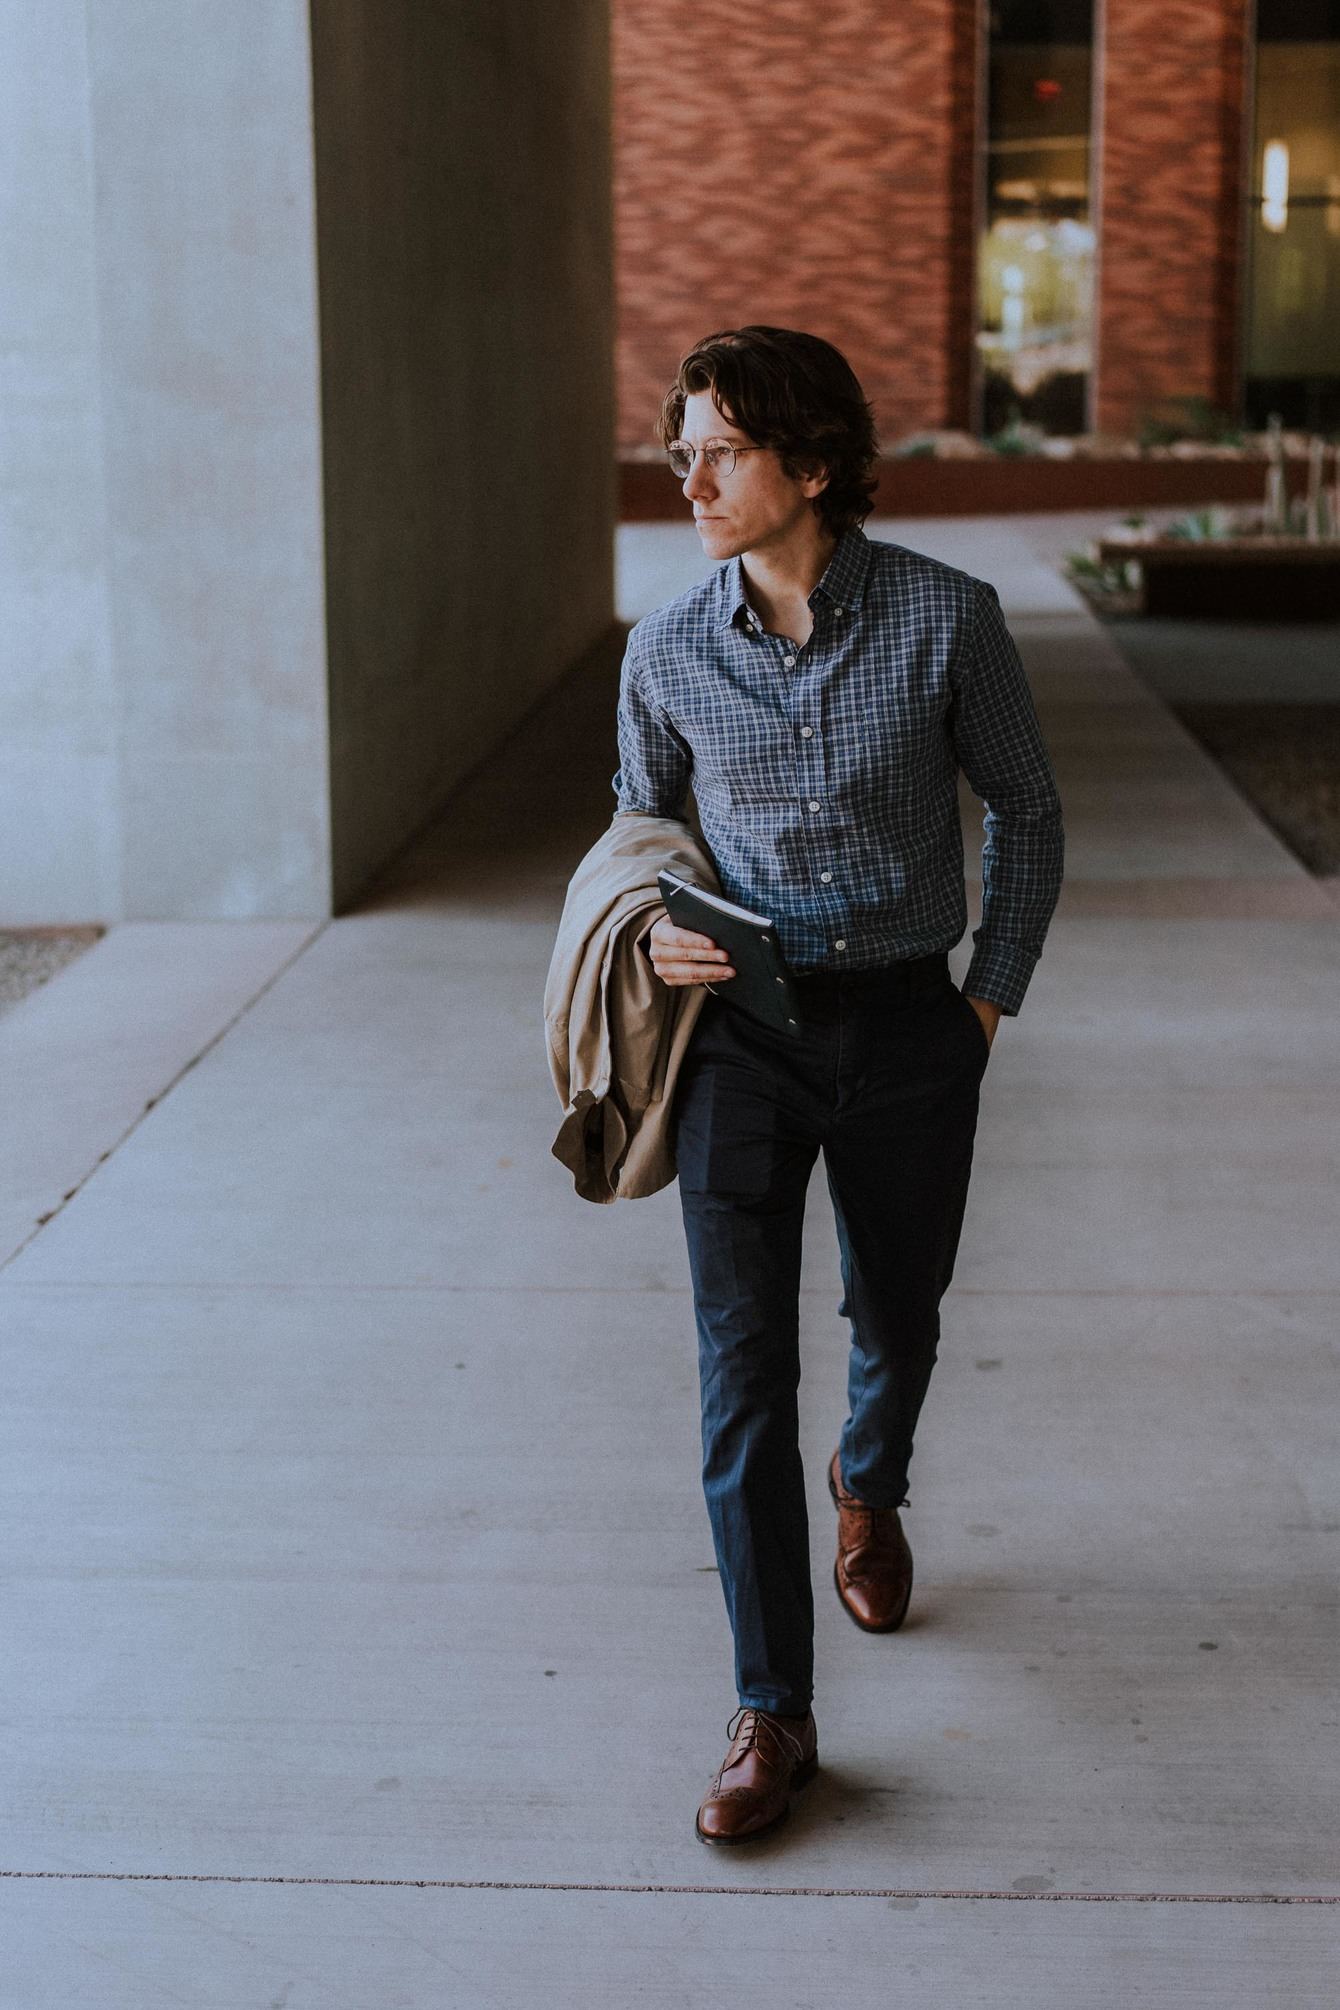 Business Casual With Chinos - The Modest Man